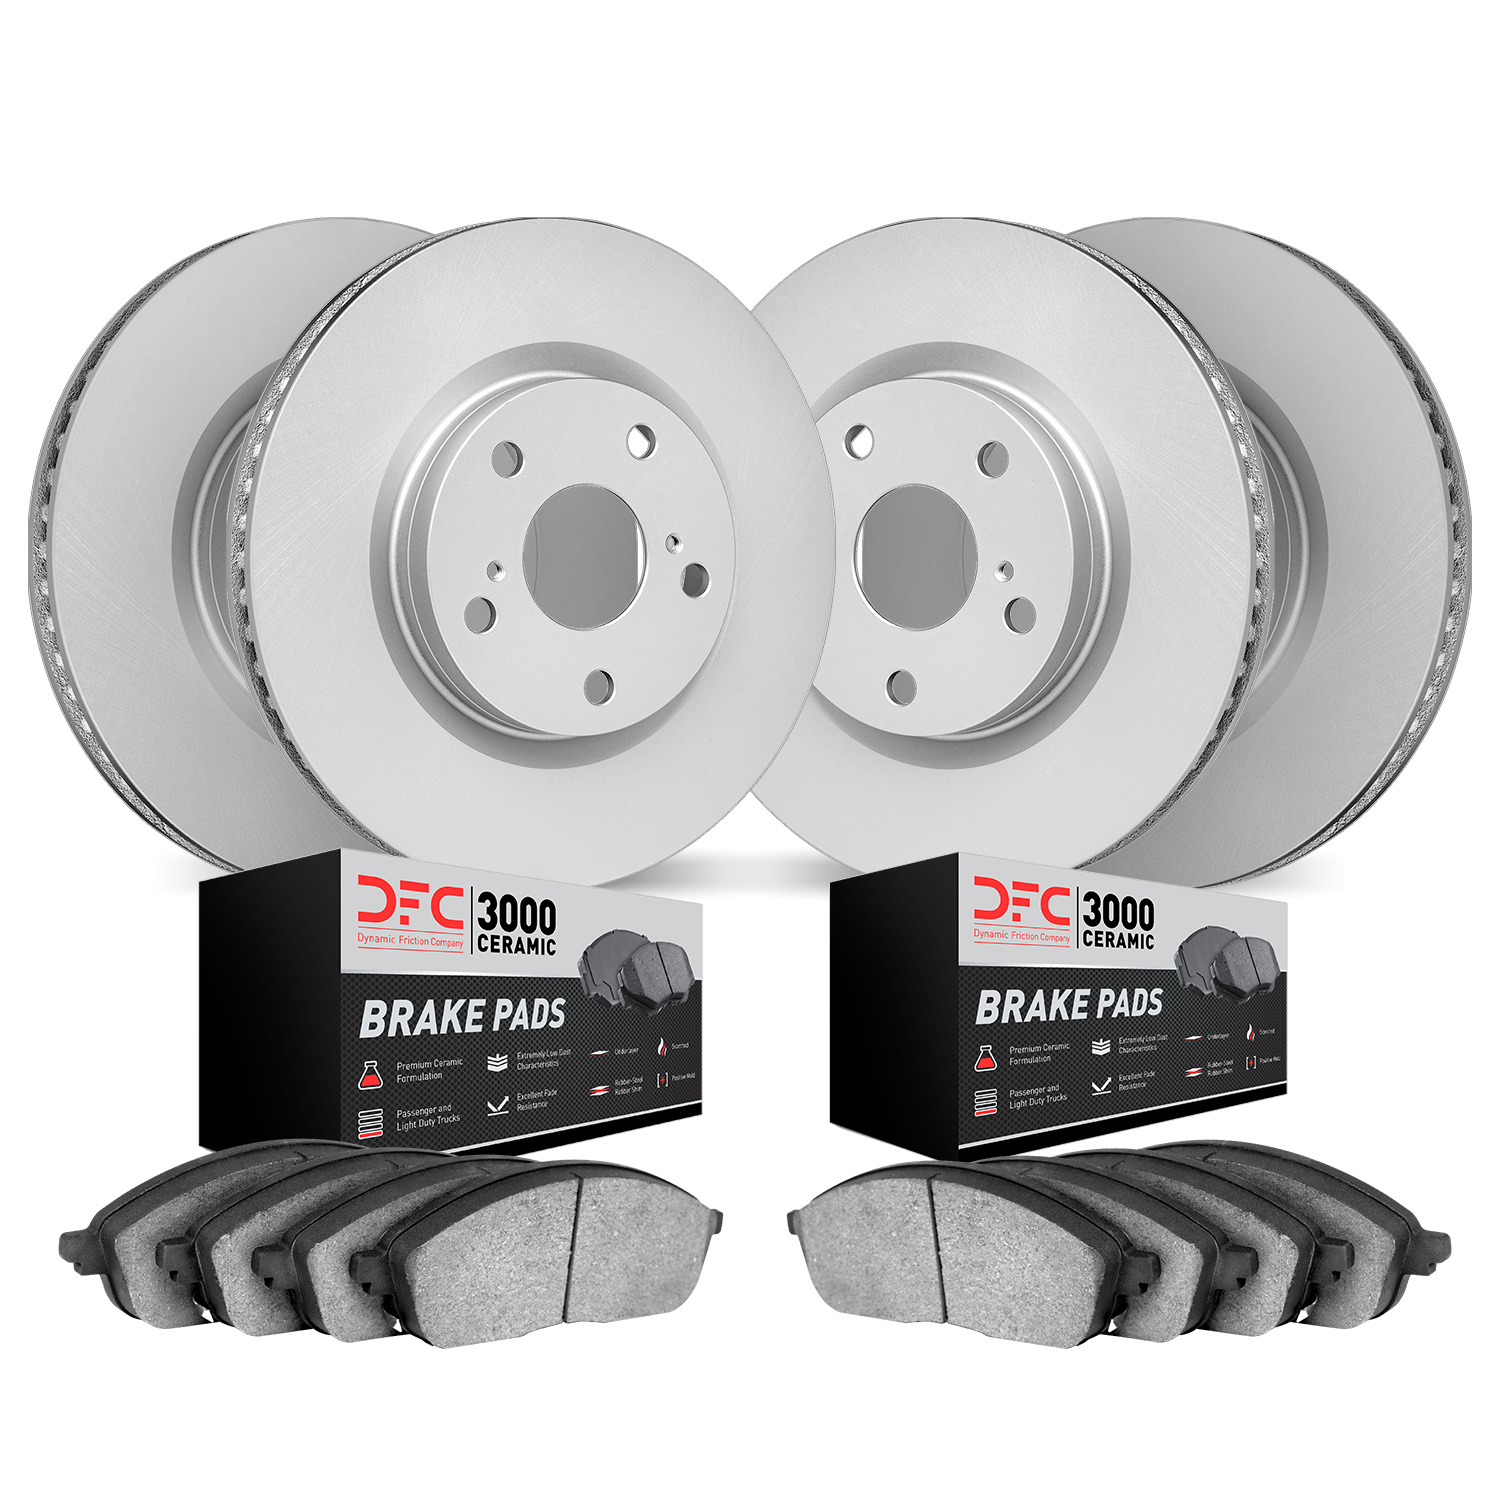 4304-31059 Geospec Brake Rotors with 3000-Series Ceramic Brake Pads Kit, 2012-2019 BMW, Position: Front and Rear